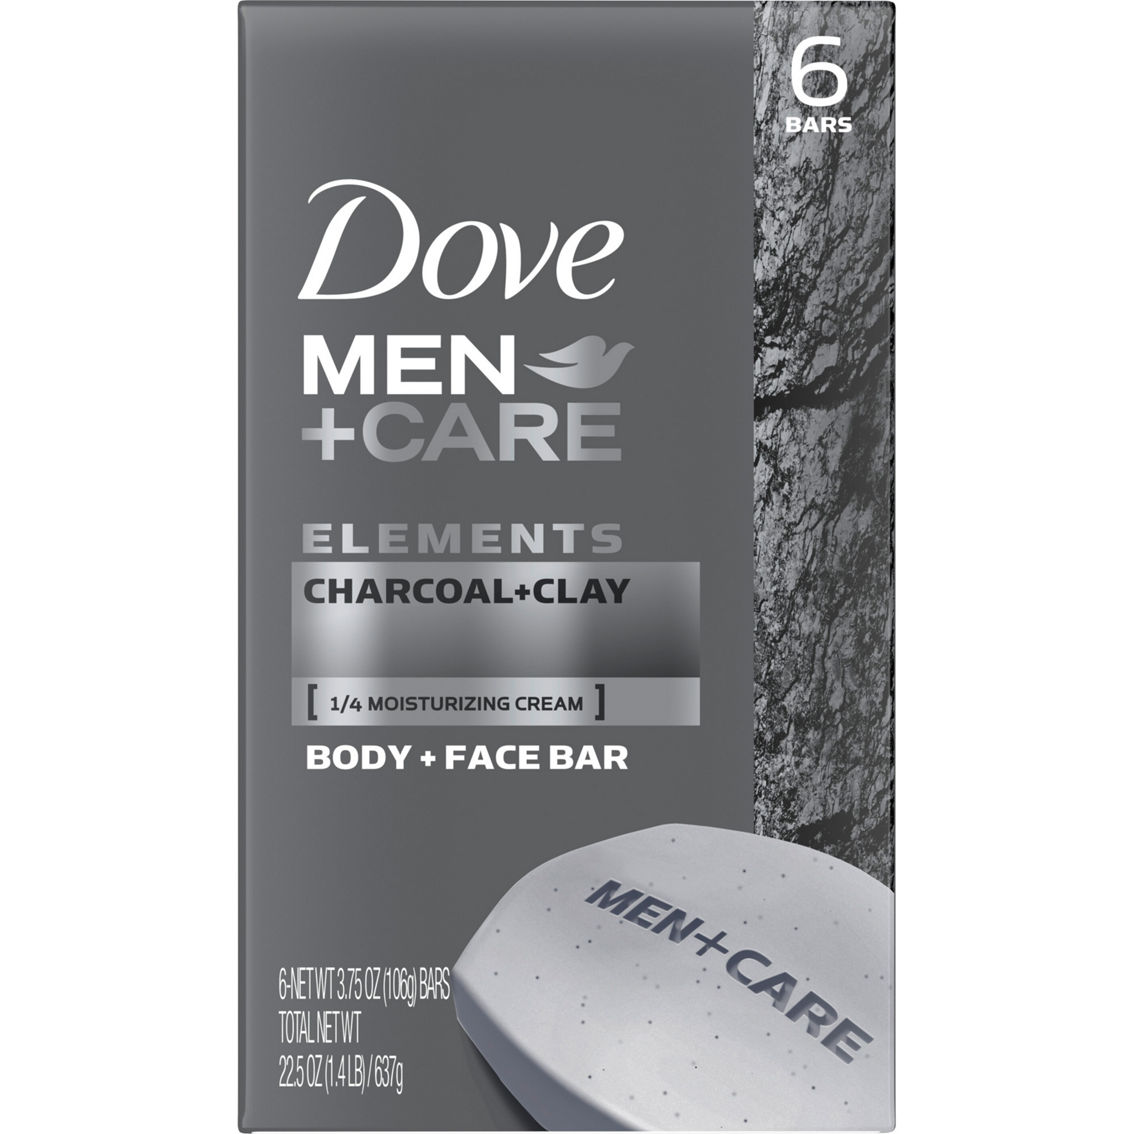 Dove Men + Care Elements Charcoal + Clay Body and Face Bar 6 pk.